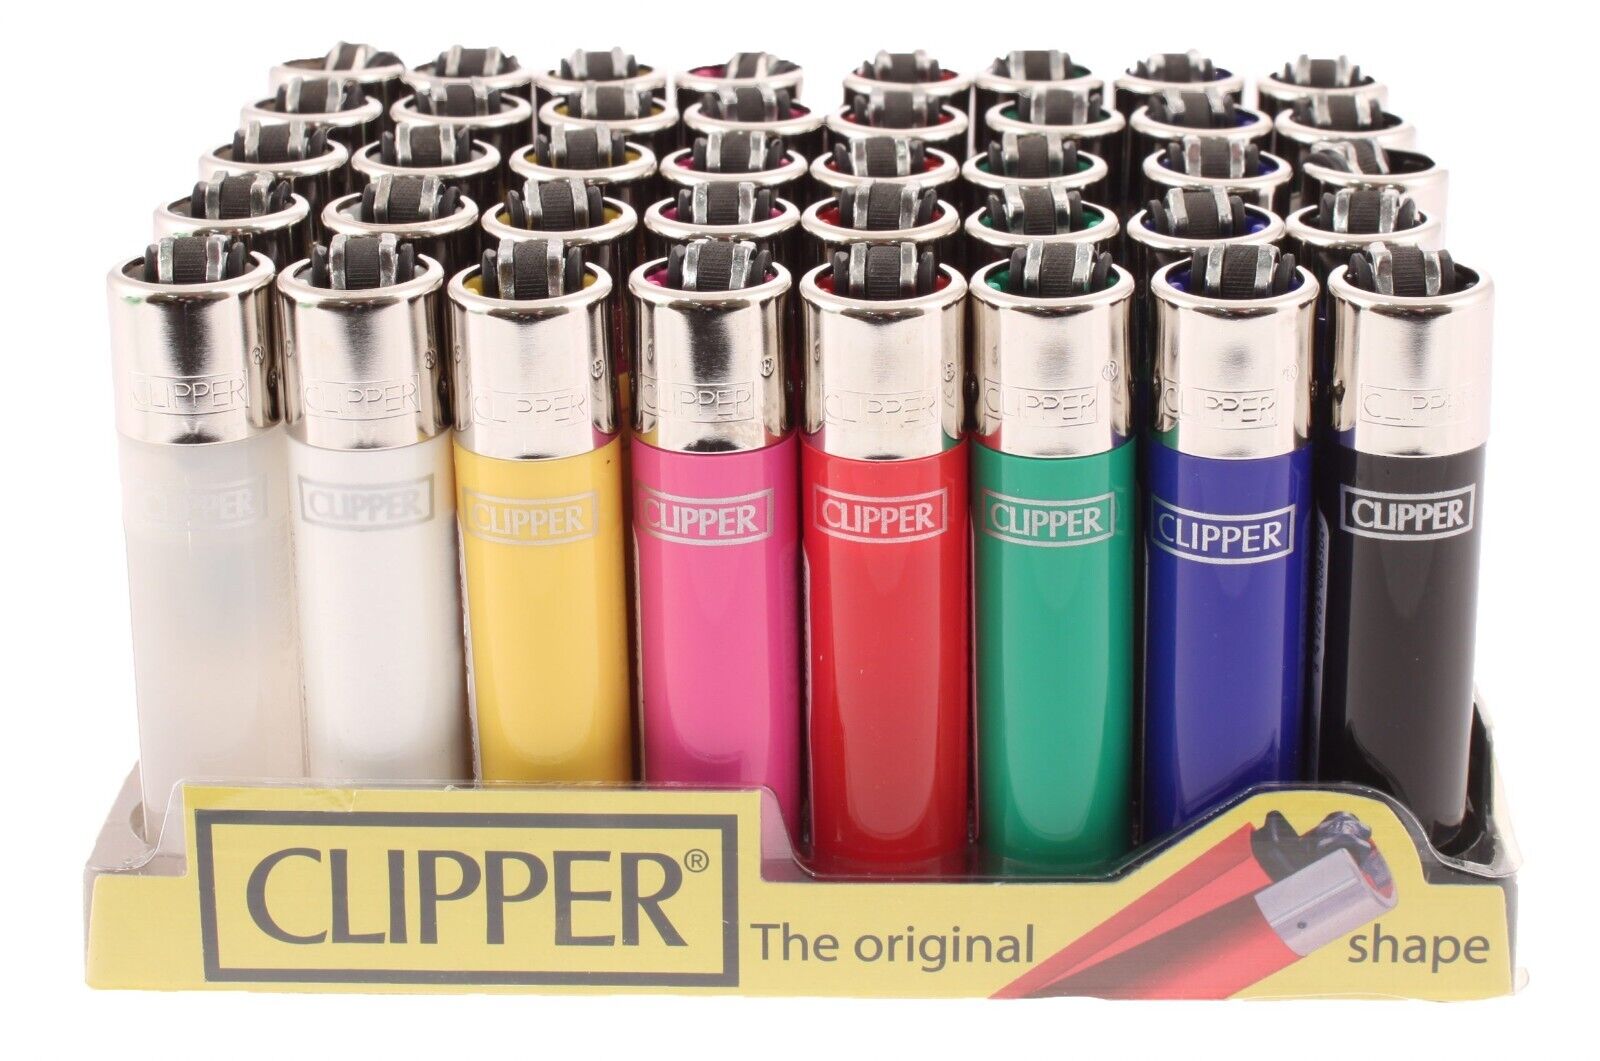 4 x Clipper Full Size Lighters (Translucent Colors) Funny Cool Lighter